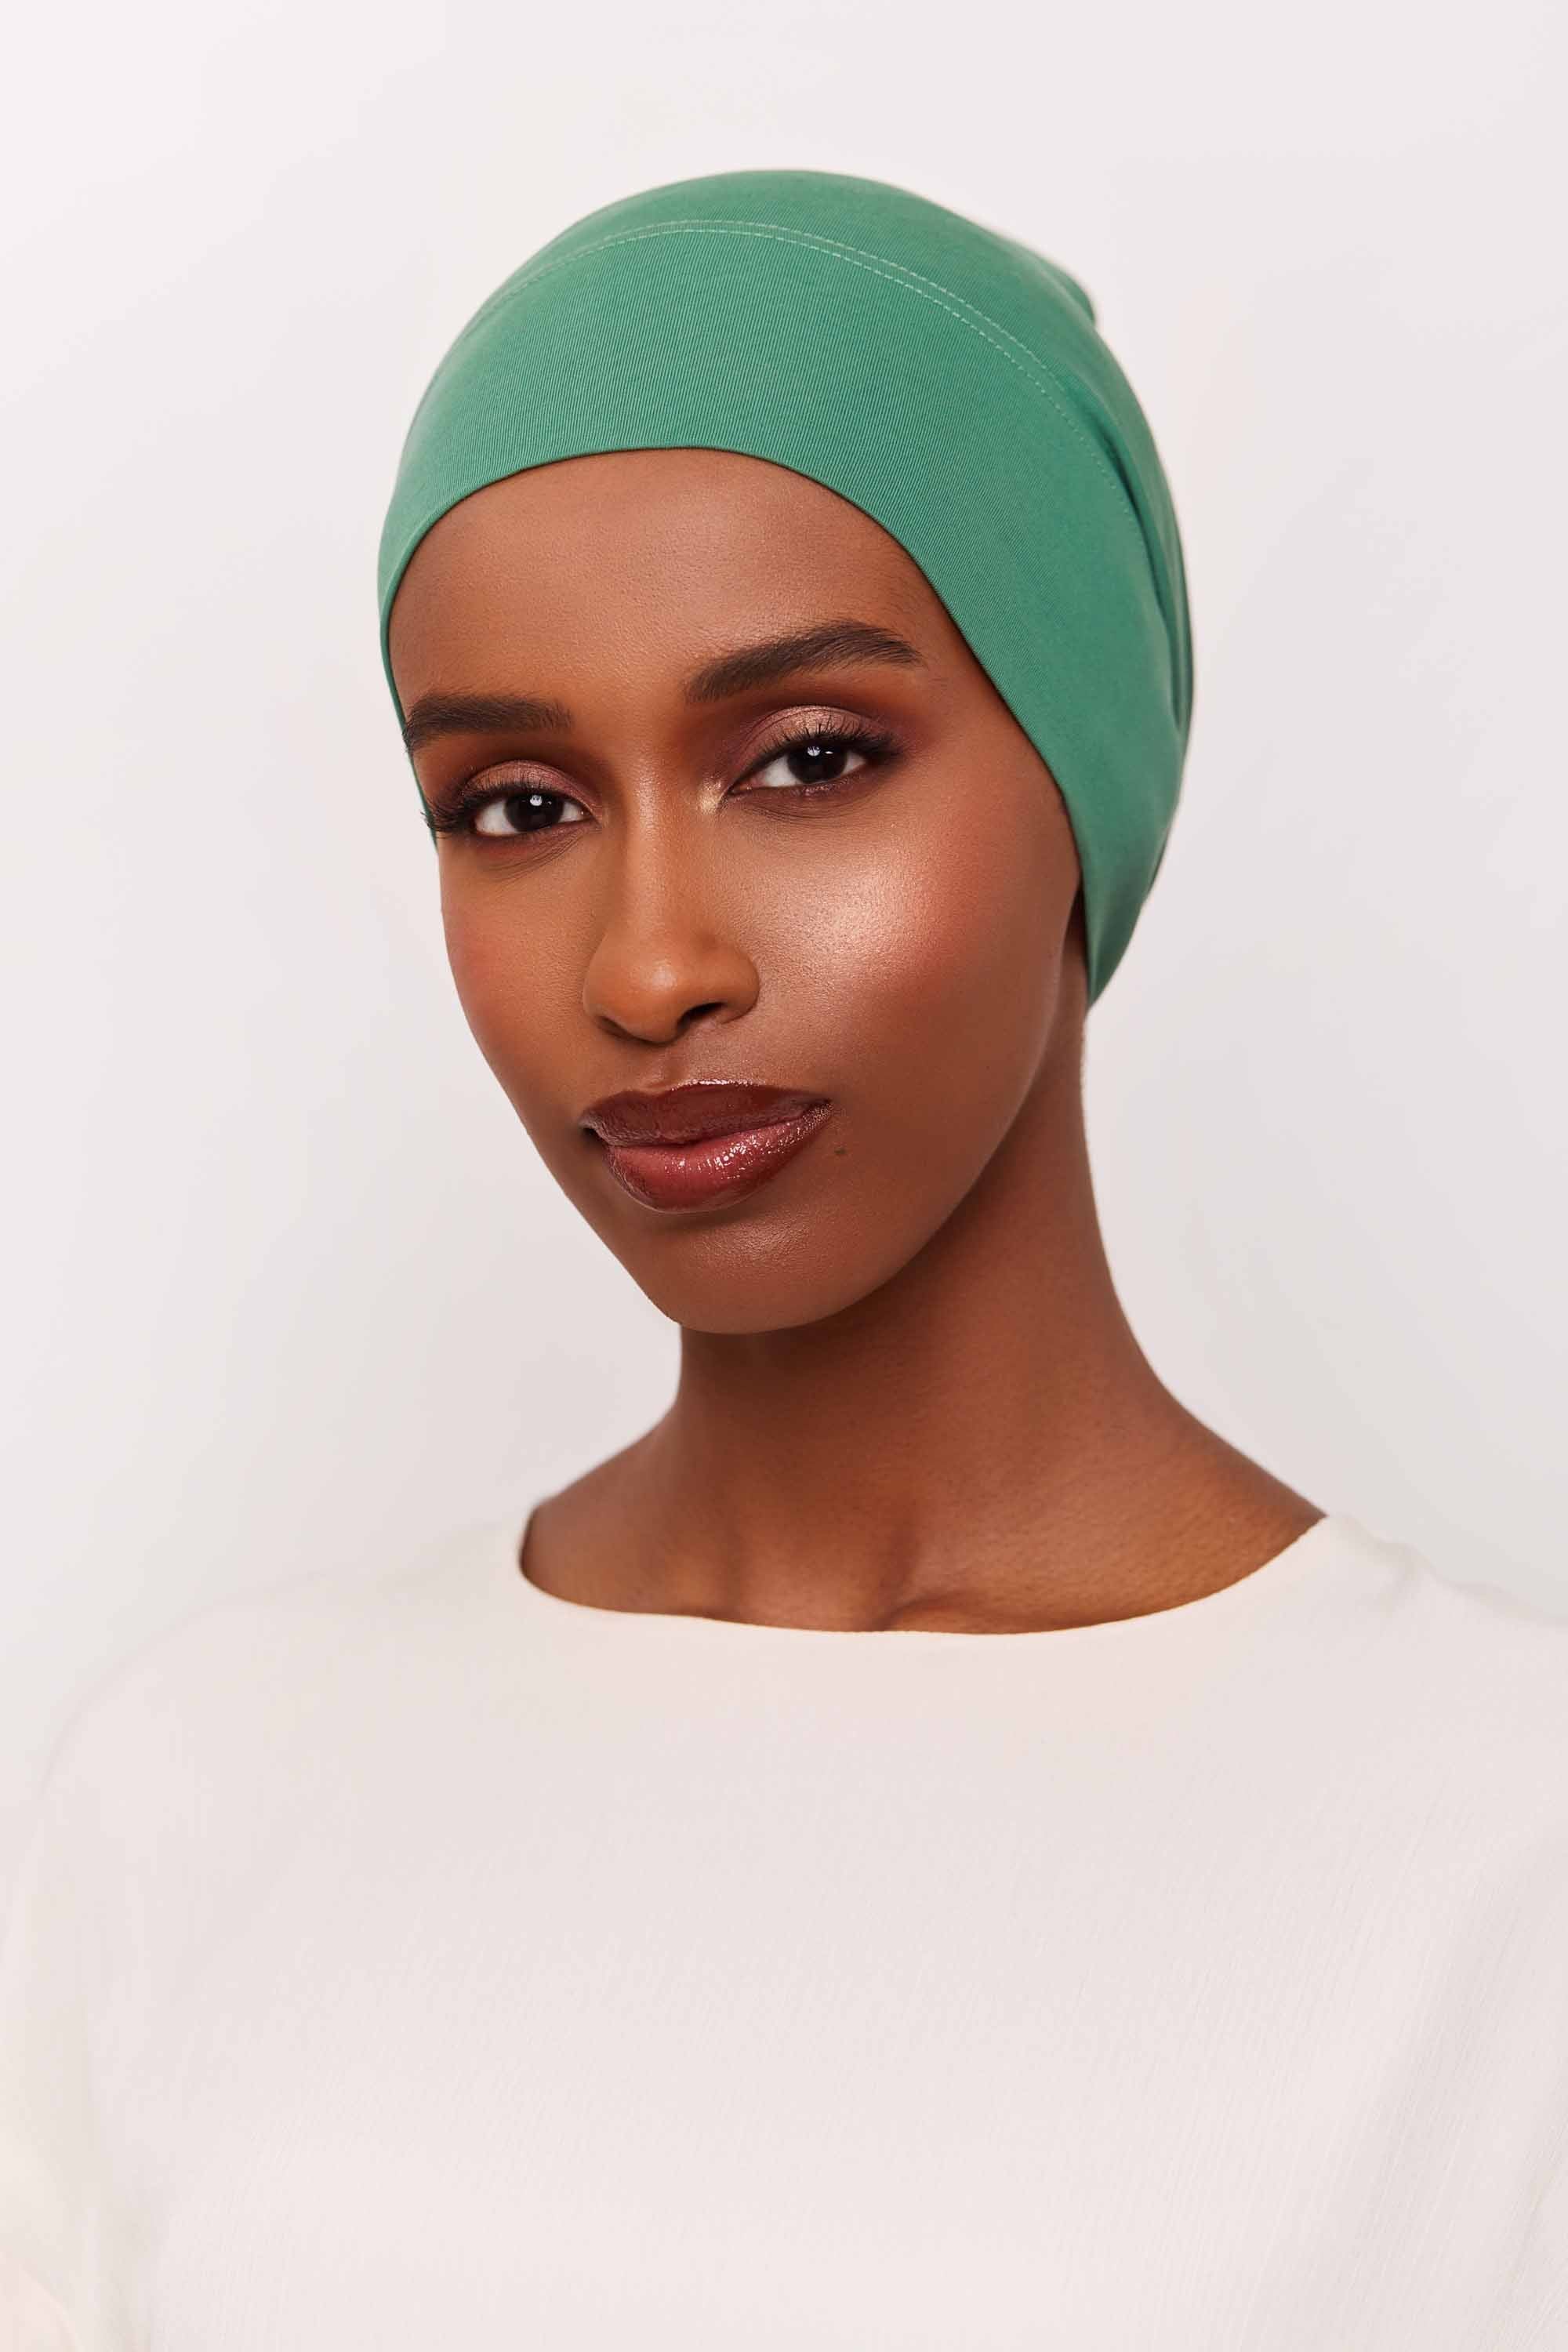 Cotton Undercap - Foliage Green Extra Small Accessories Veiled Collection 